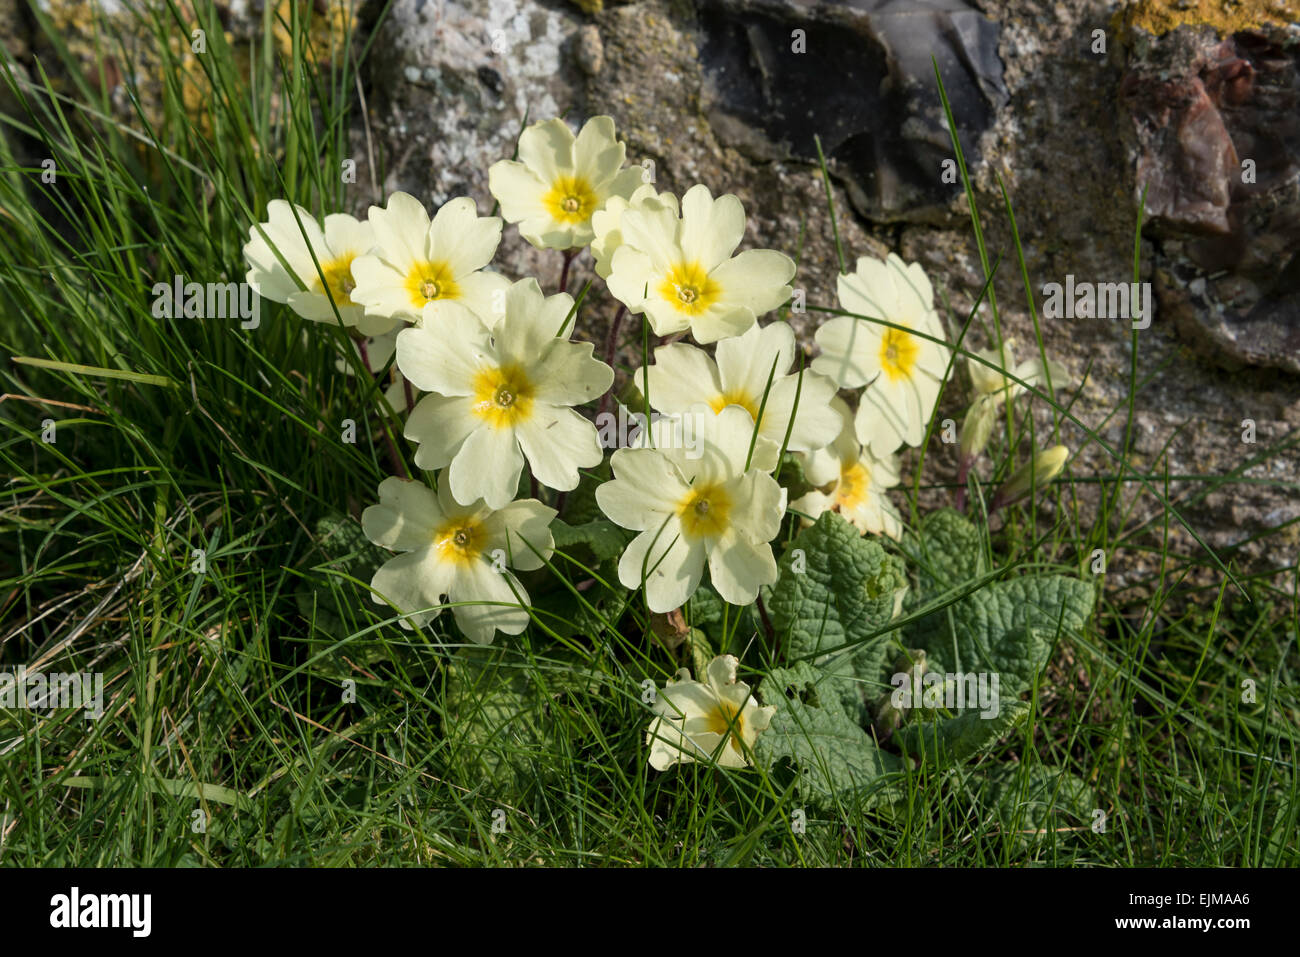 A small clump of Primroses growing next to a stone wall Stock Photo